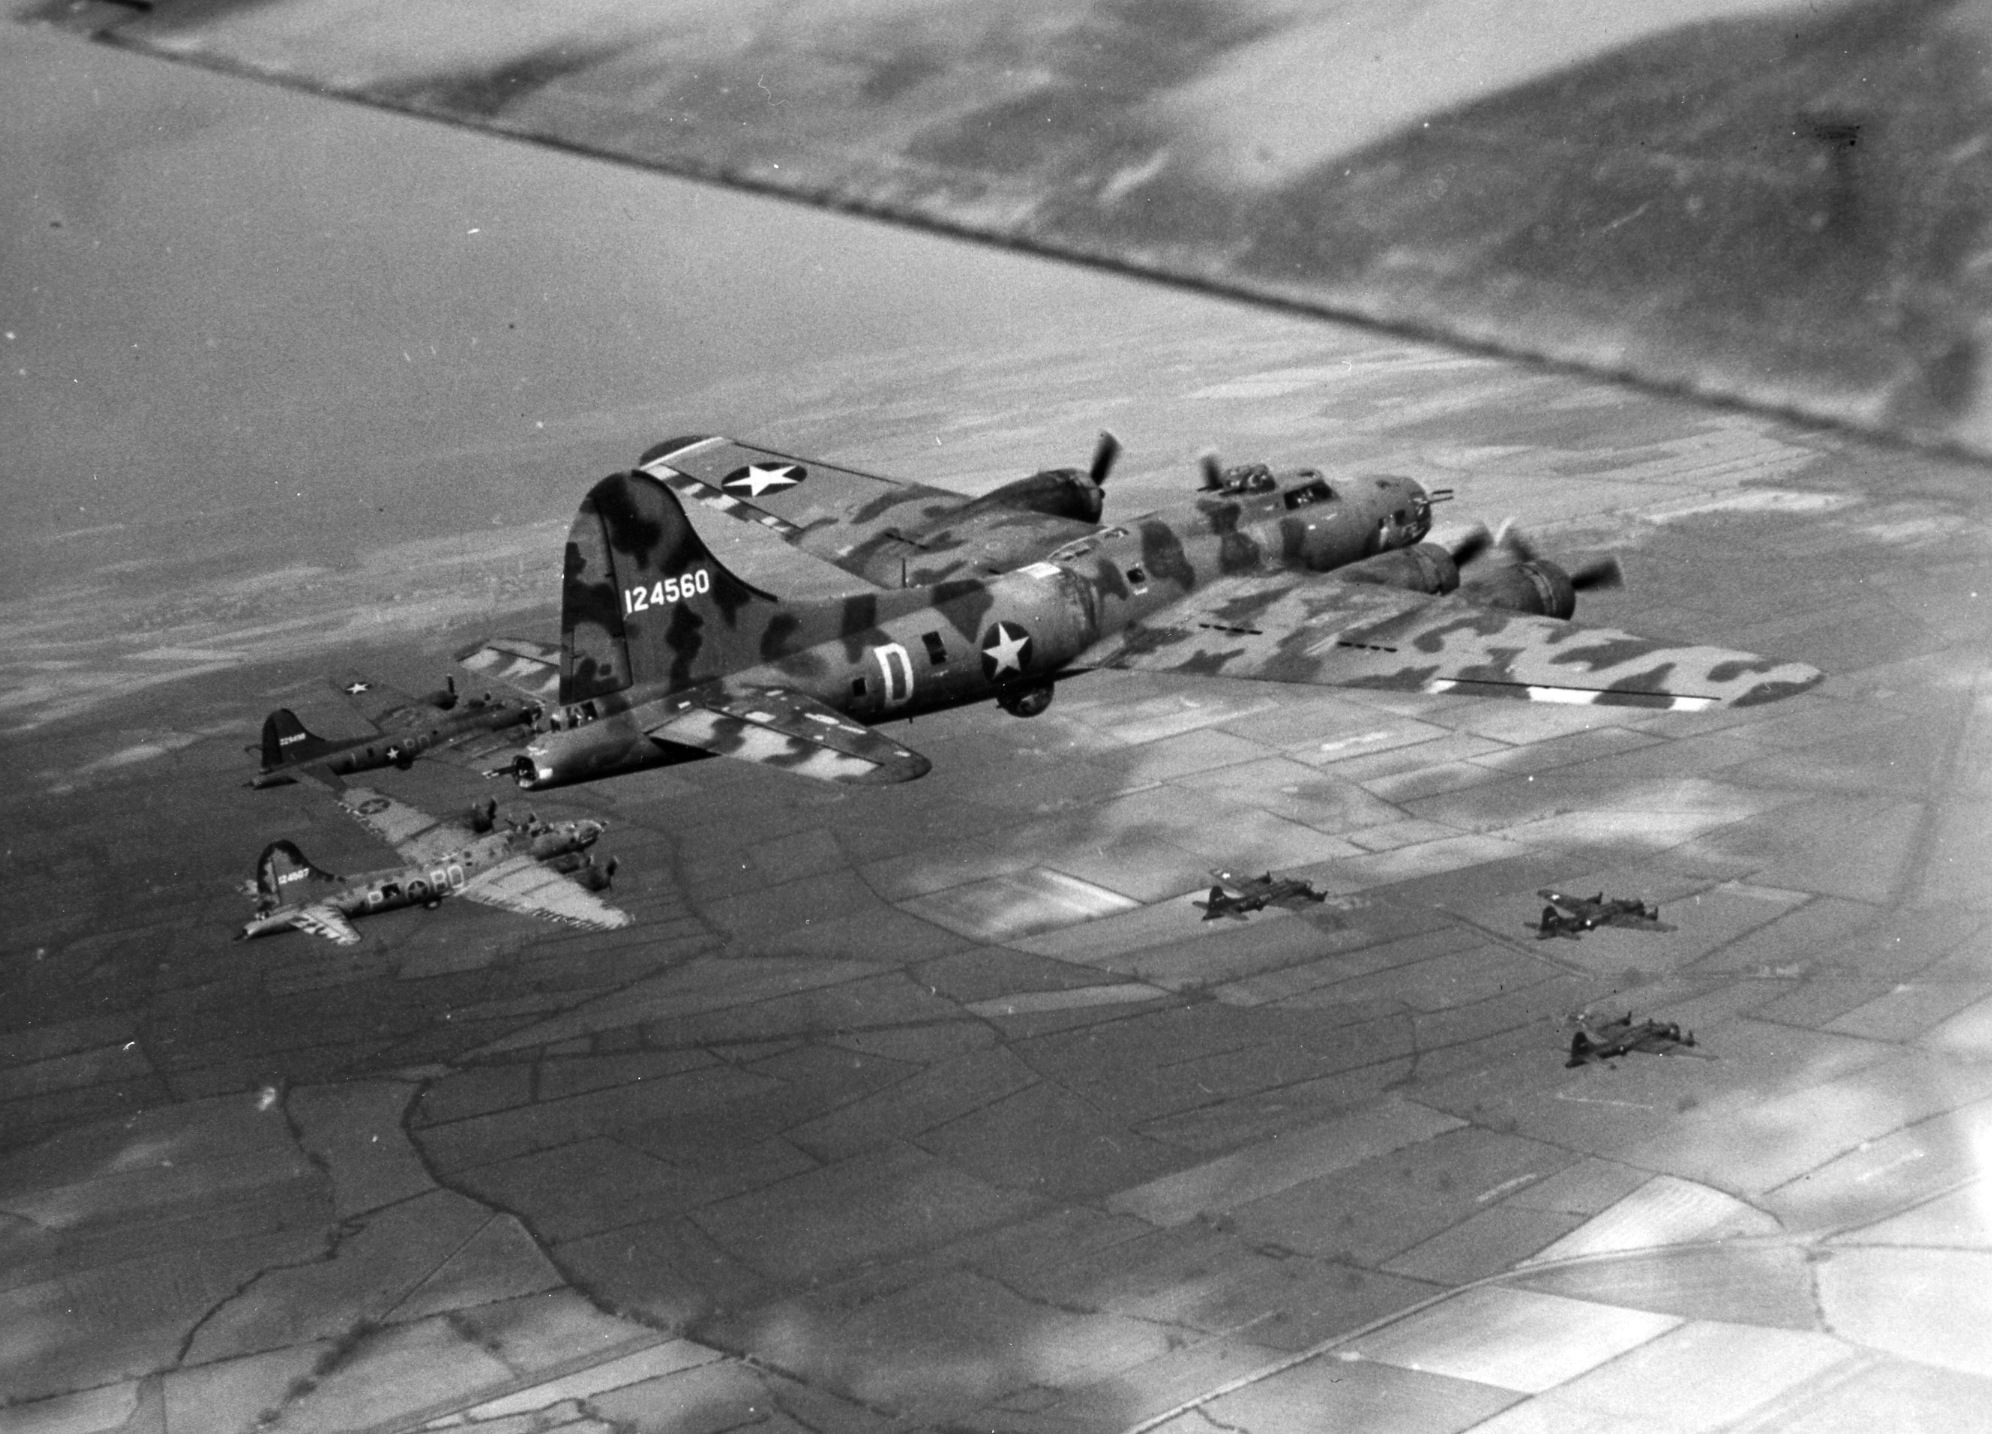 Boeing B-17F Fortress “Little Audrey” flying with other bombers of the 306th Bomb Group based at Thurleigh, Bedfordshire, England, United Kingdom, May or Jun 1943. Note the unusual camouflage paint scheme.